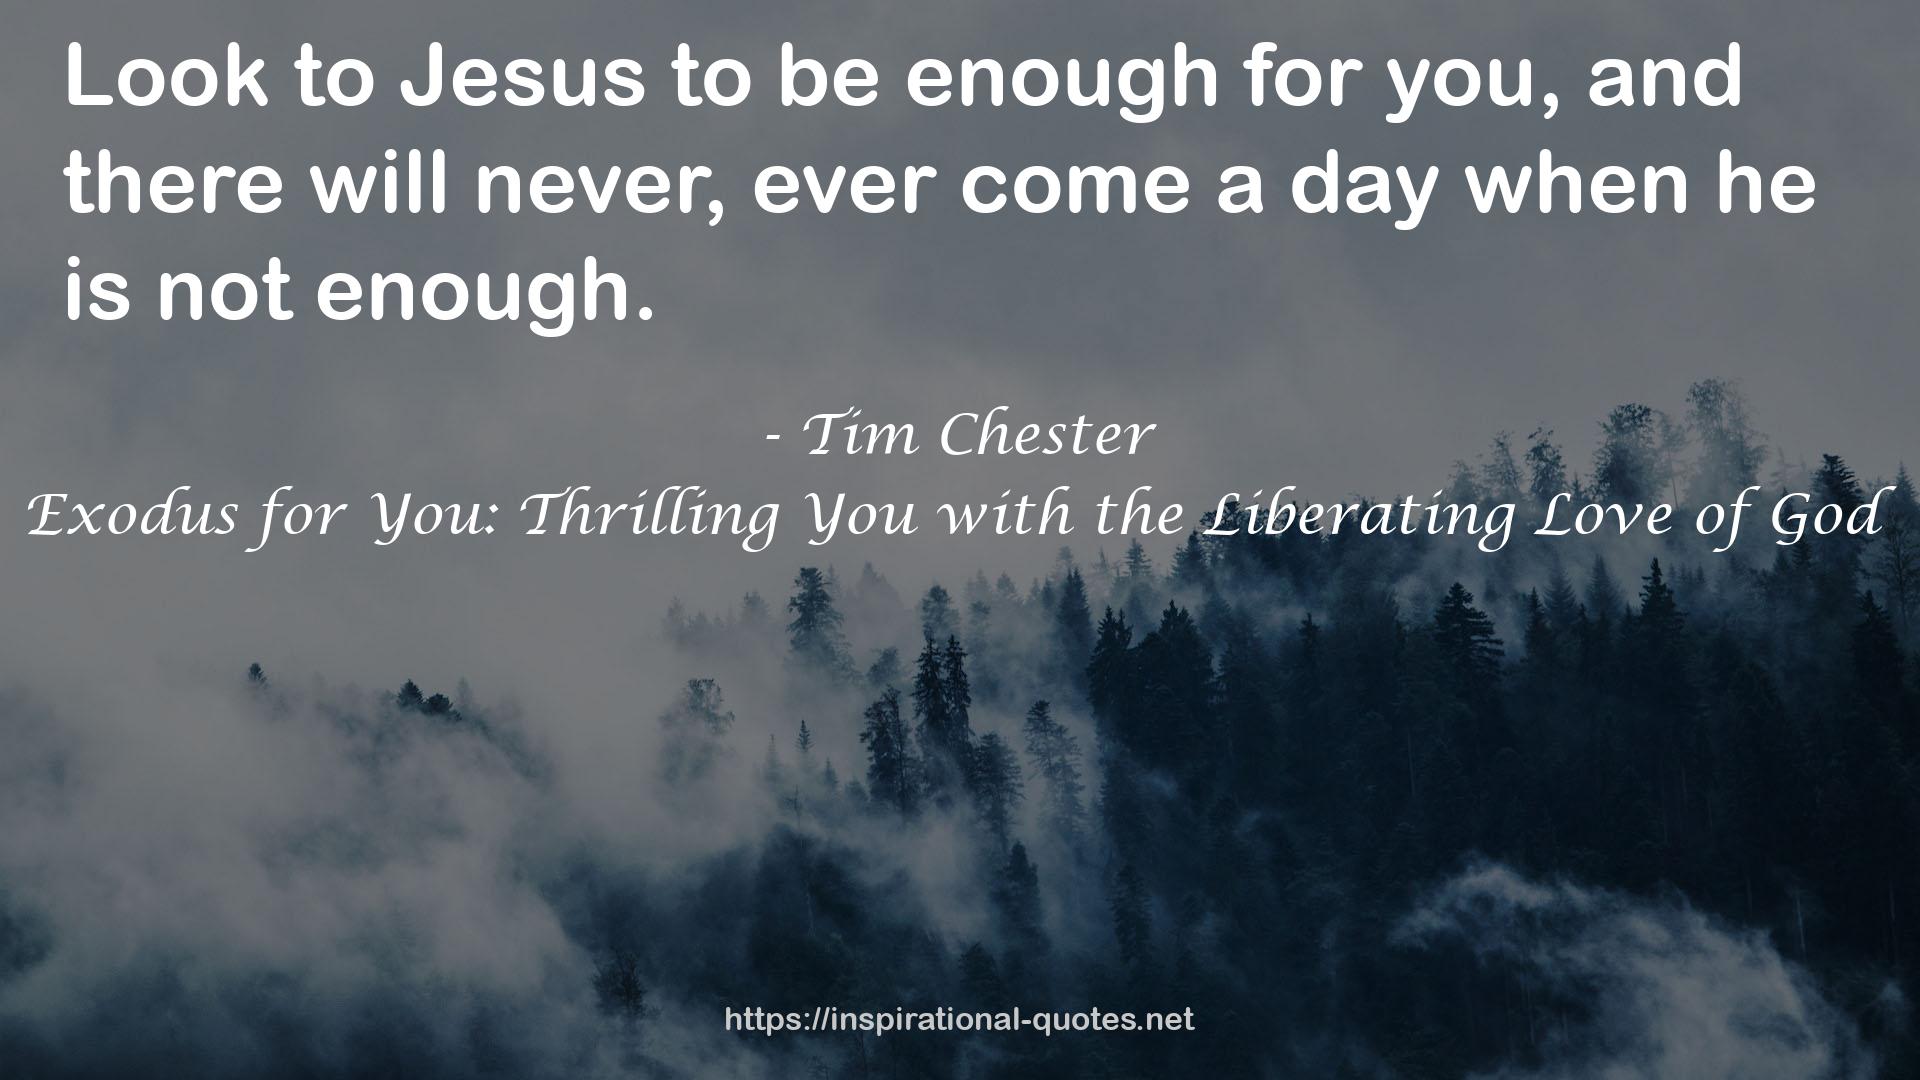 Exodus for You: Thrilling You with the Liberating Love of God QUOTES